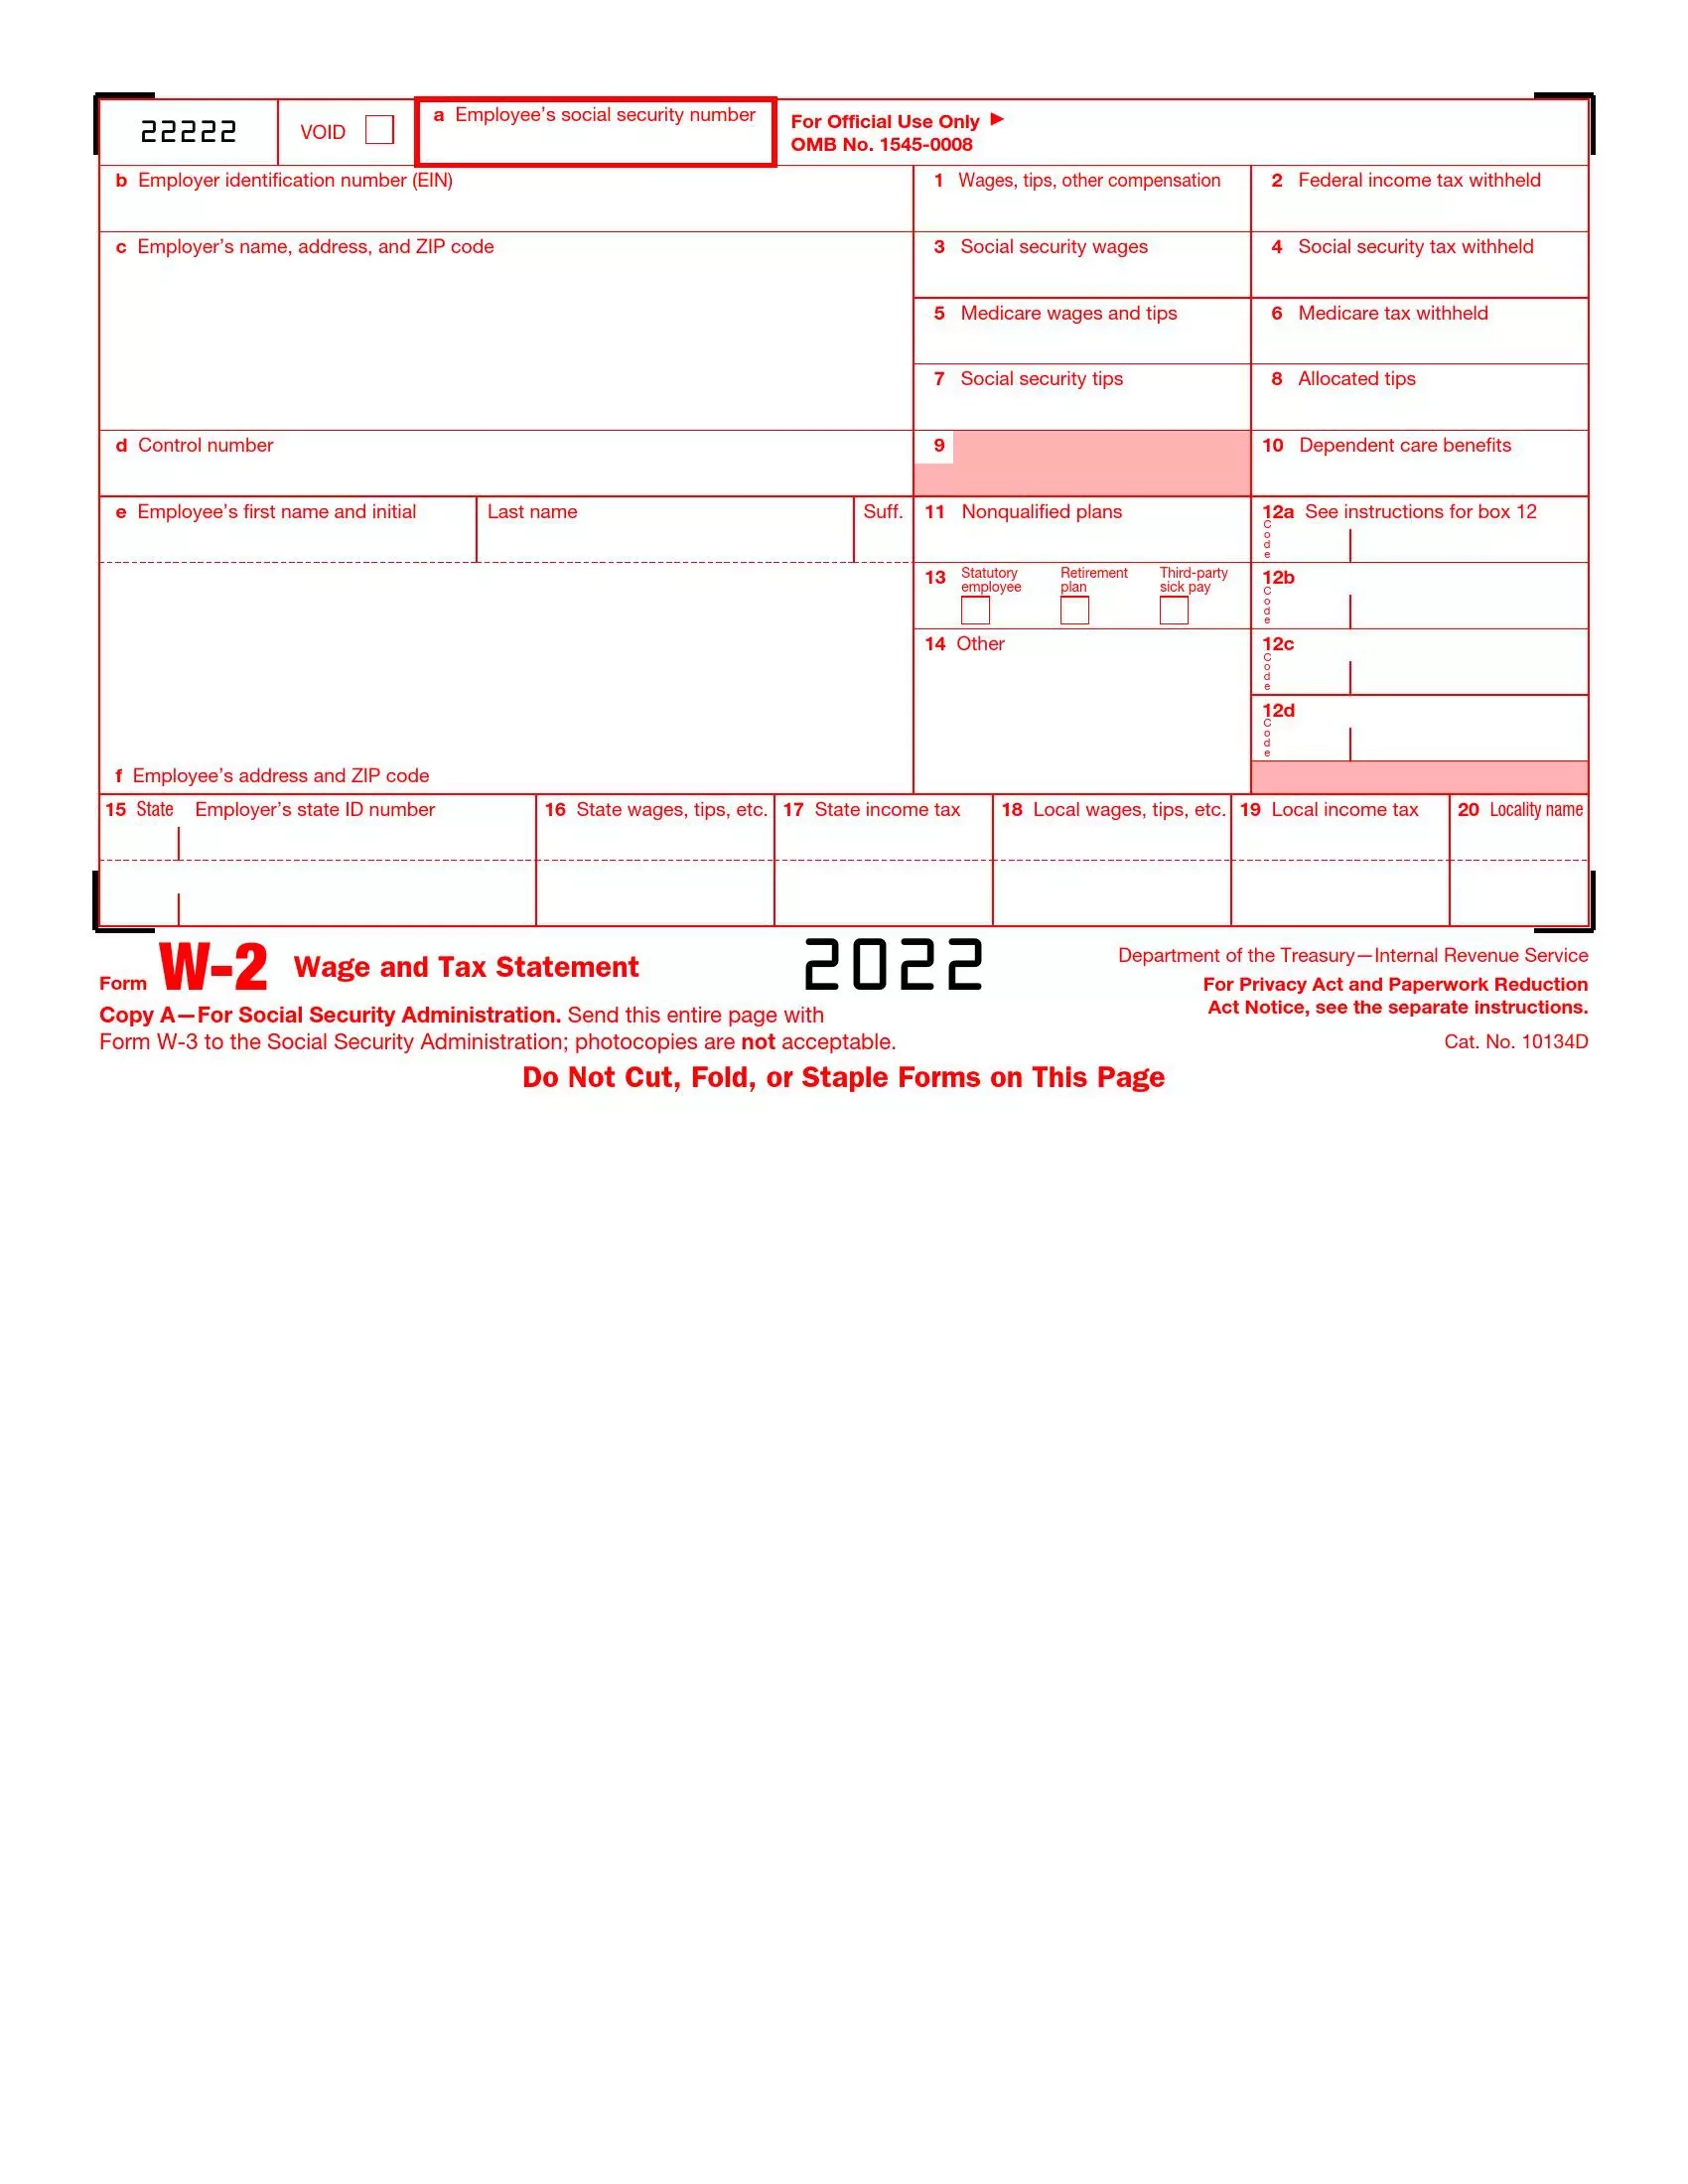 Irs Form W-2 ≡ Fill Out Printable Pdf Forms Online inside Download My W2 Form